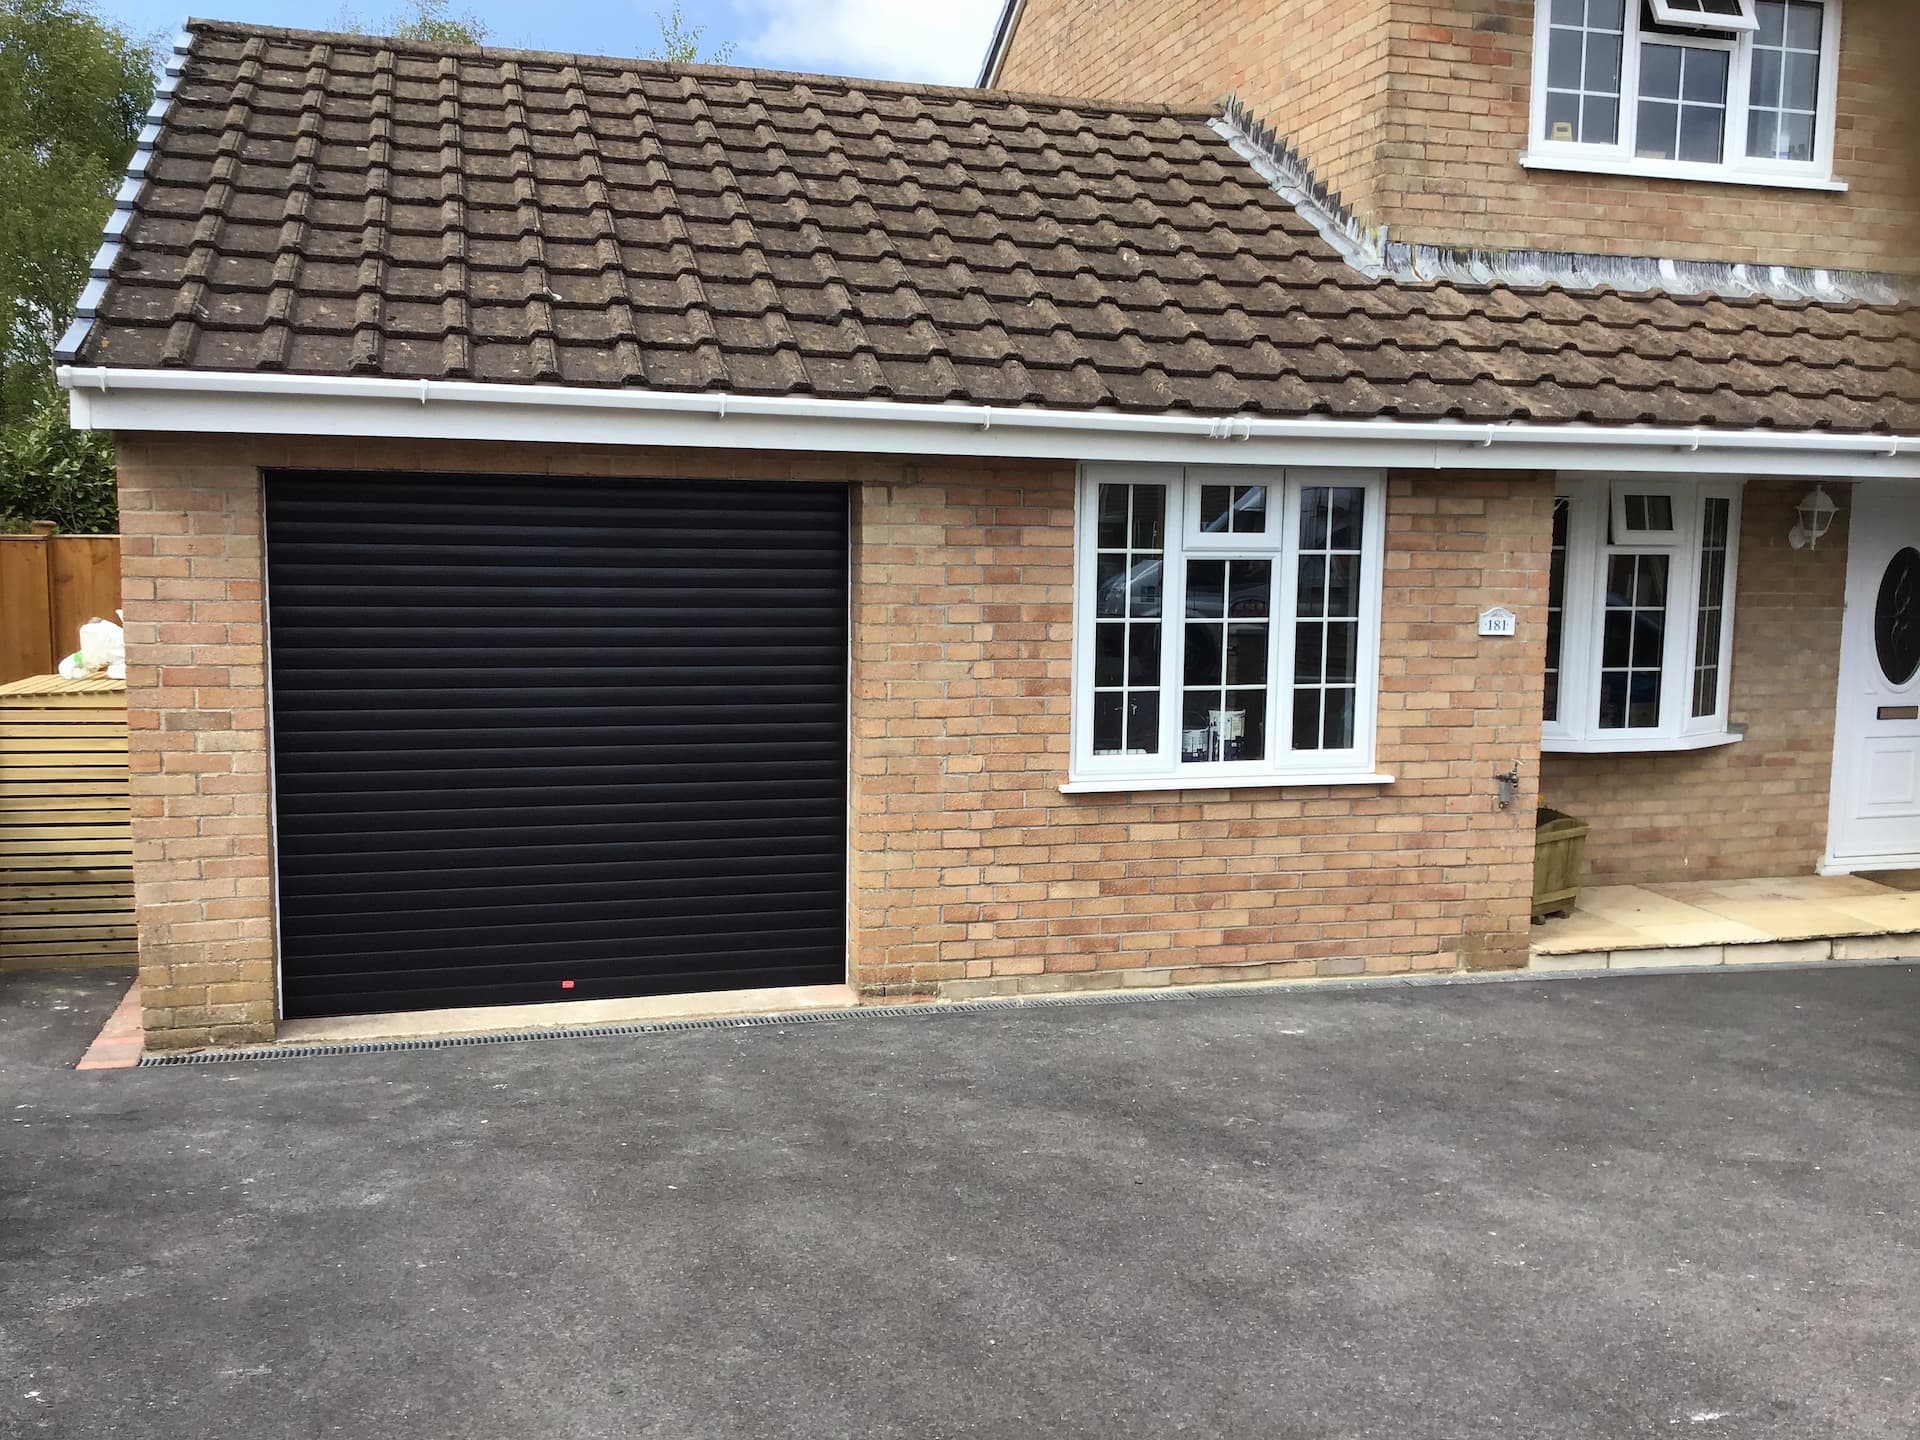 Experienced garage repair contractors in Sidmouth